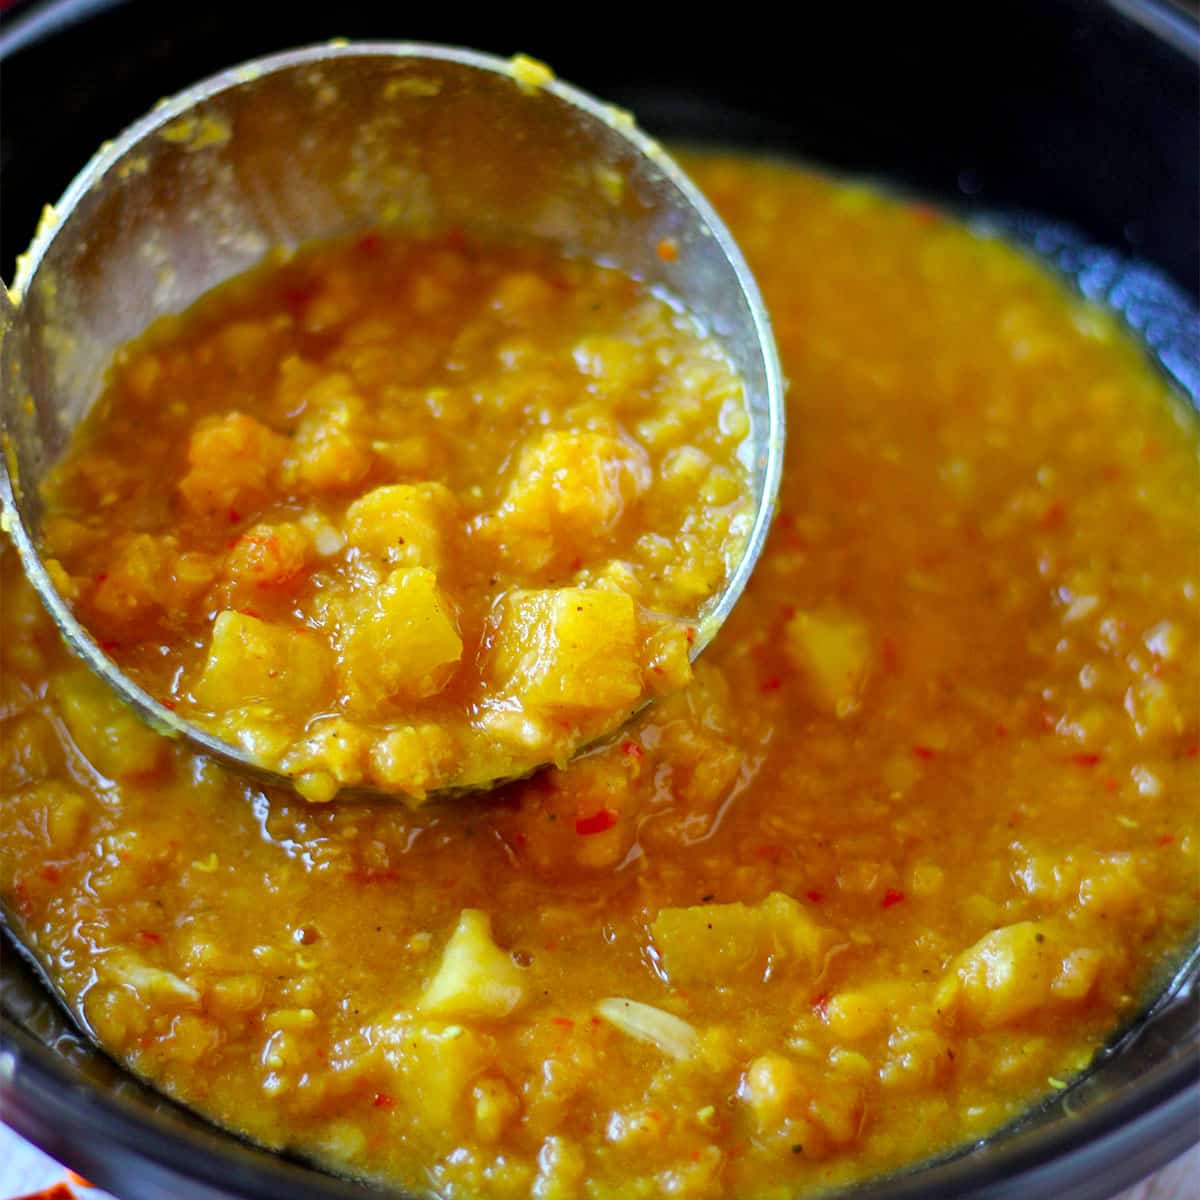 A ladle filled with pineapple and red lentil soup.